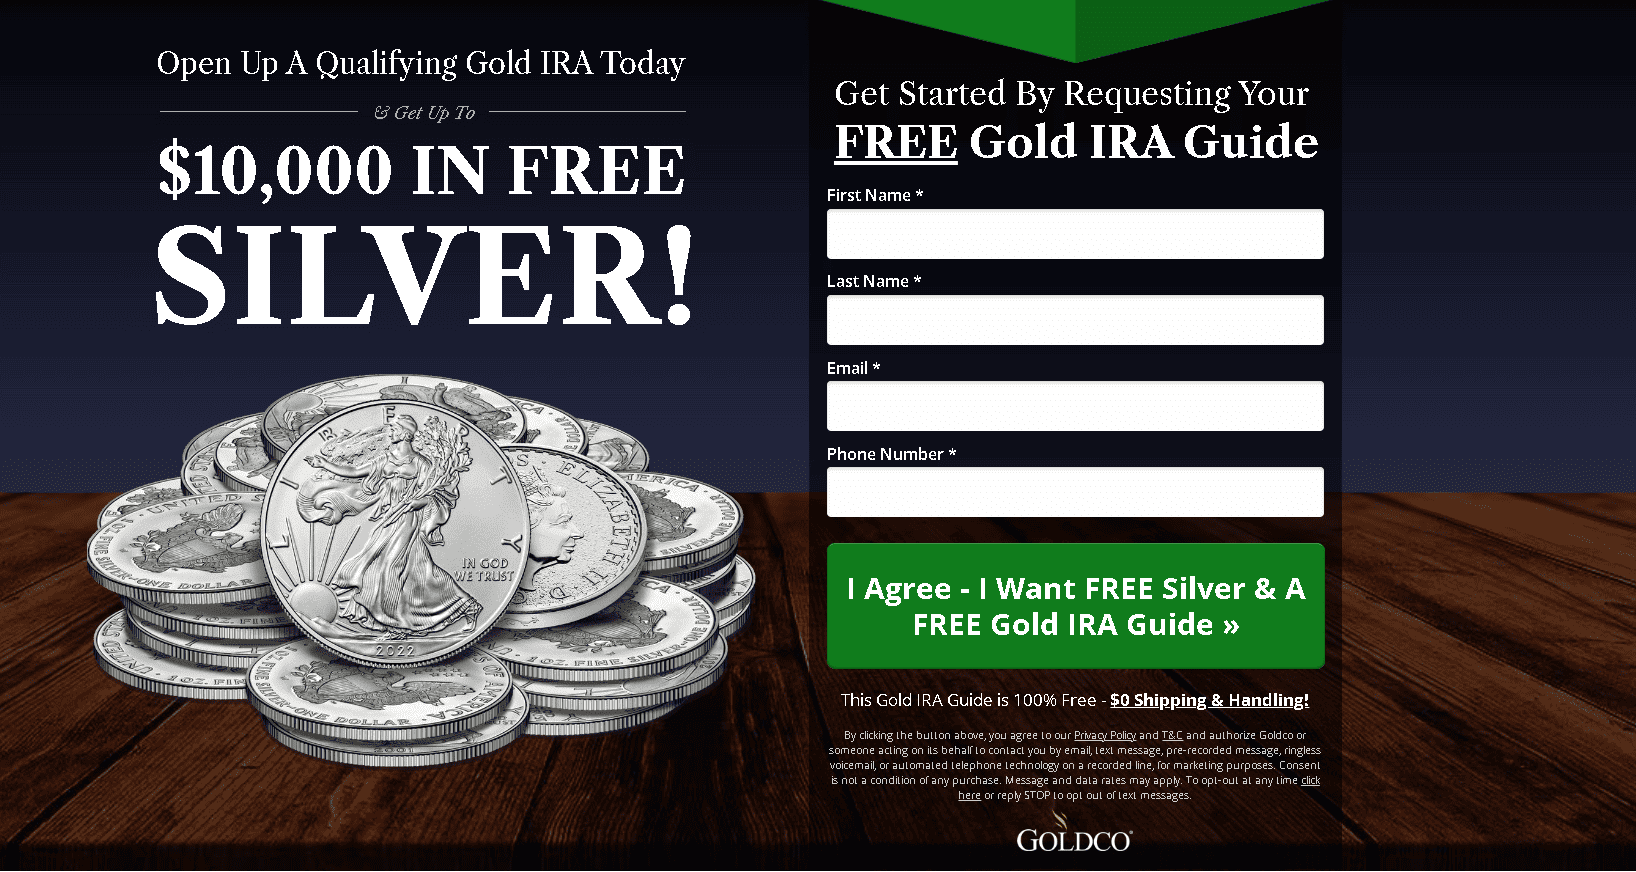 One Goldco pro is that they offer free silver to potential customers